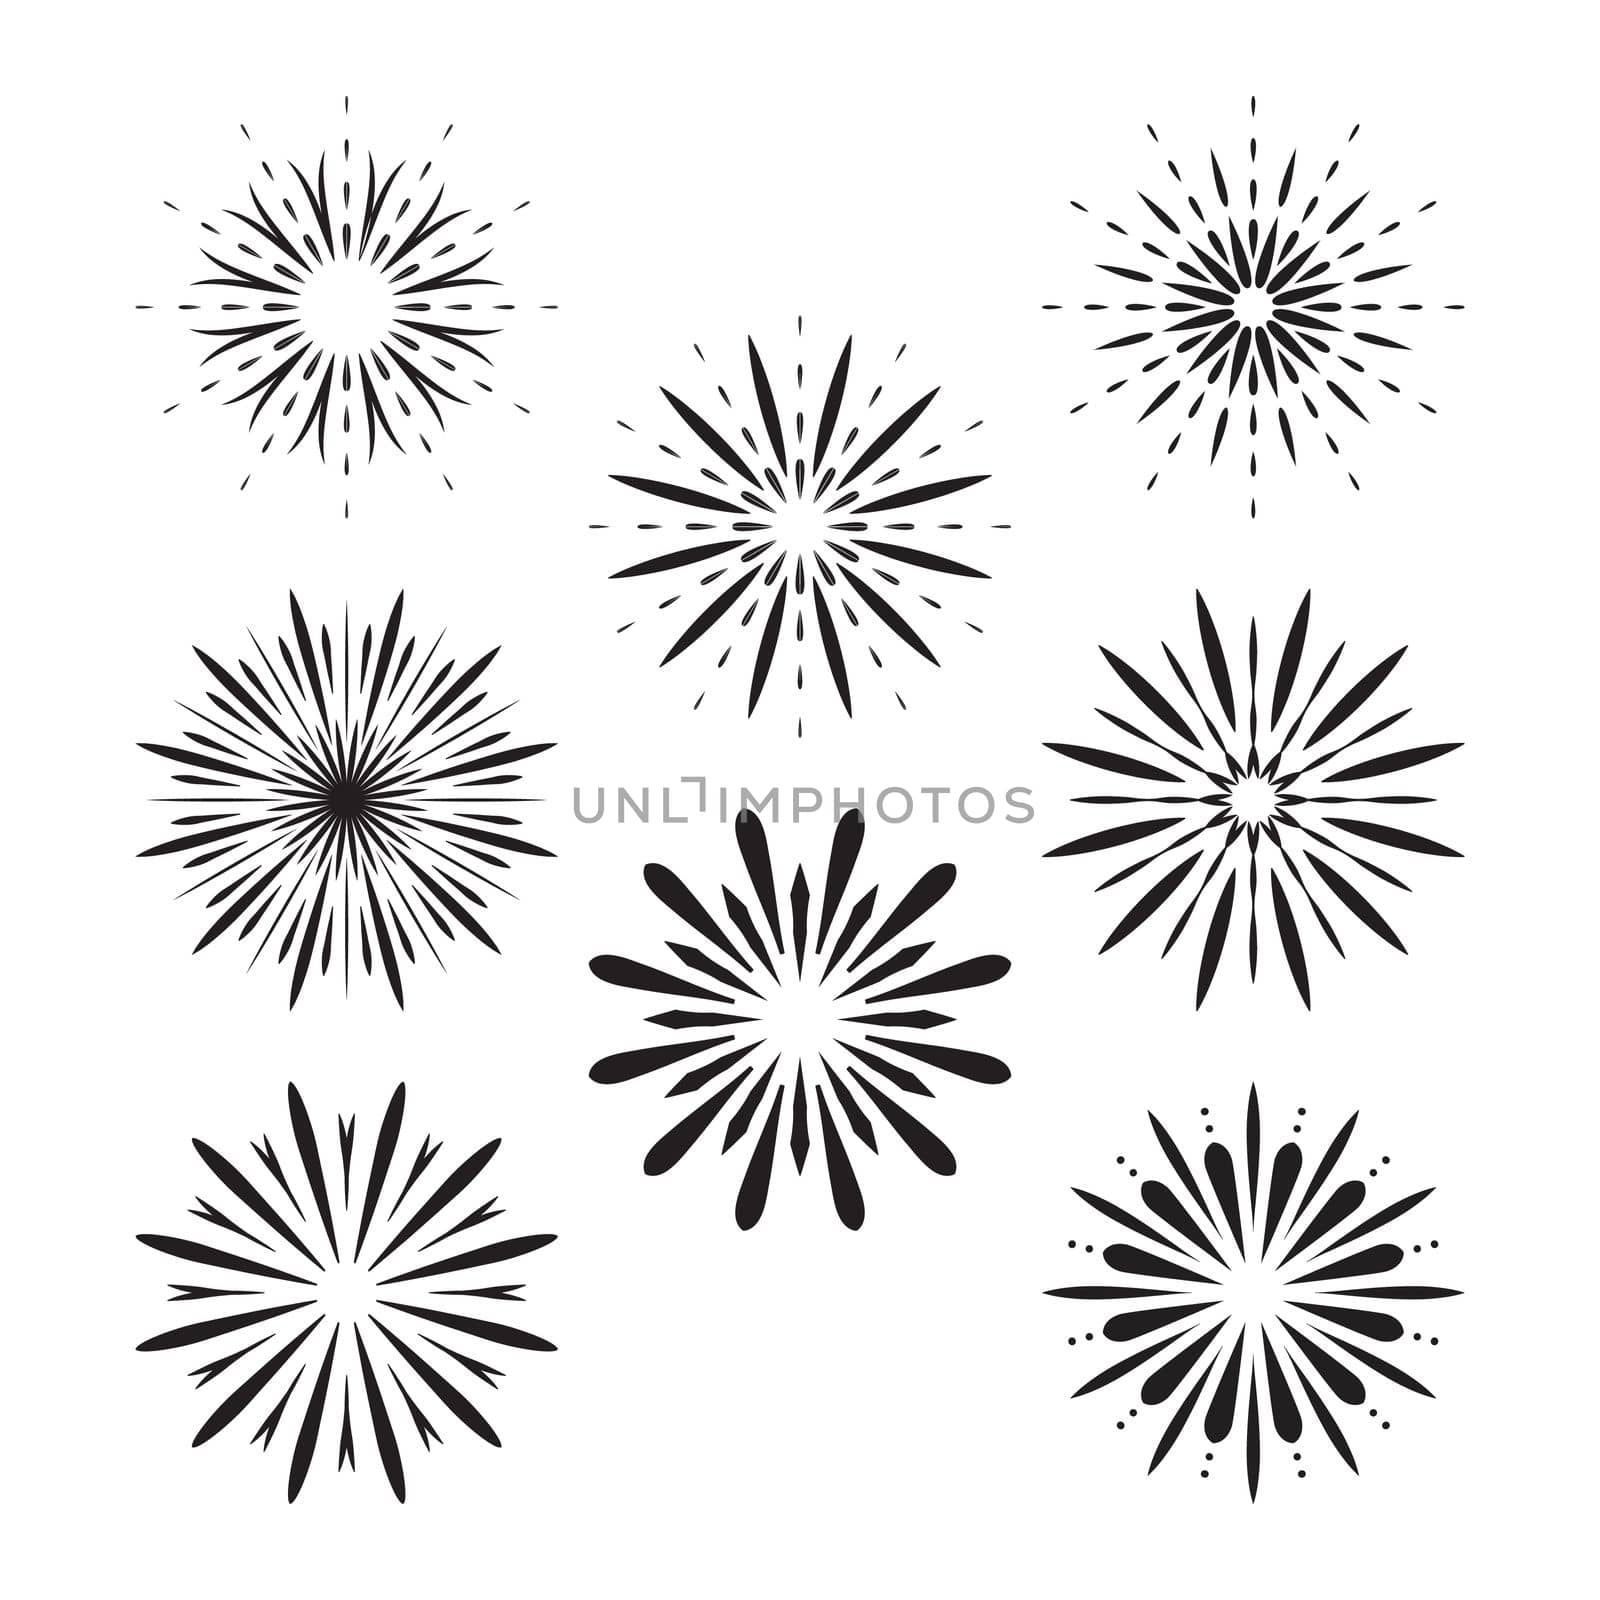 Fireworks icons collection. Graphic different black symbol for festival or carnival explosion, firecracker. Burst contour pattern shaped set isolated on white. Jpeg illustration.